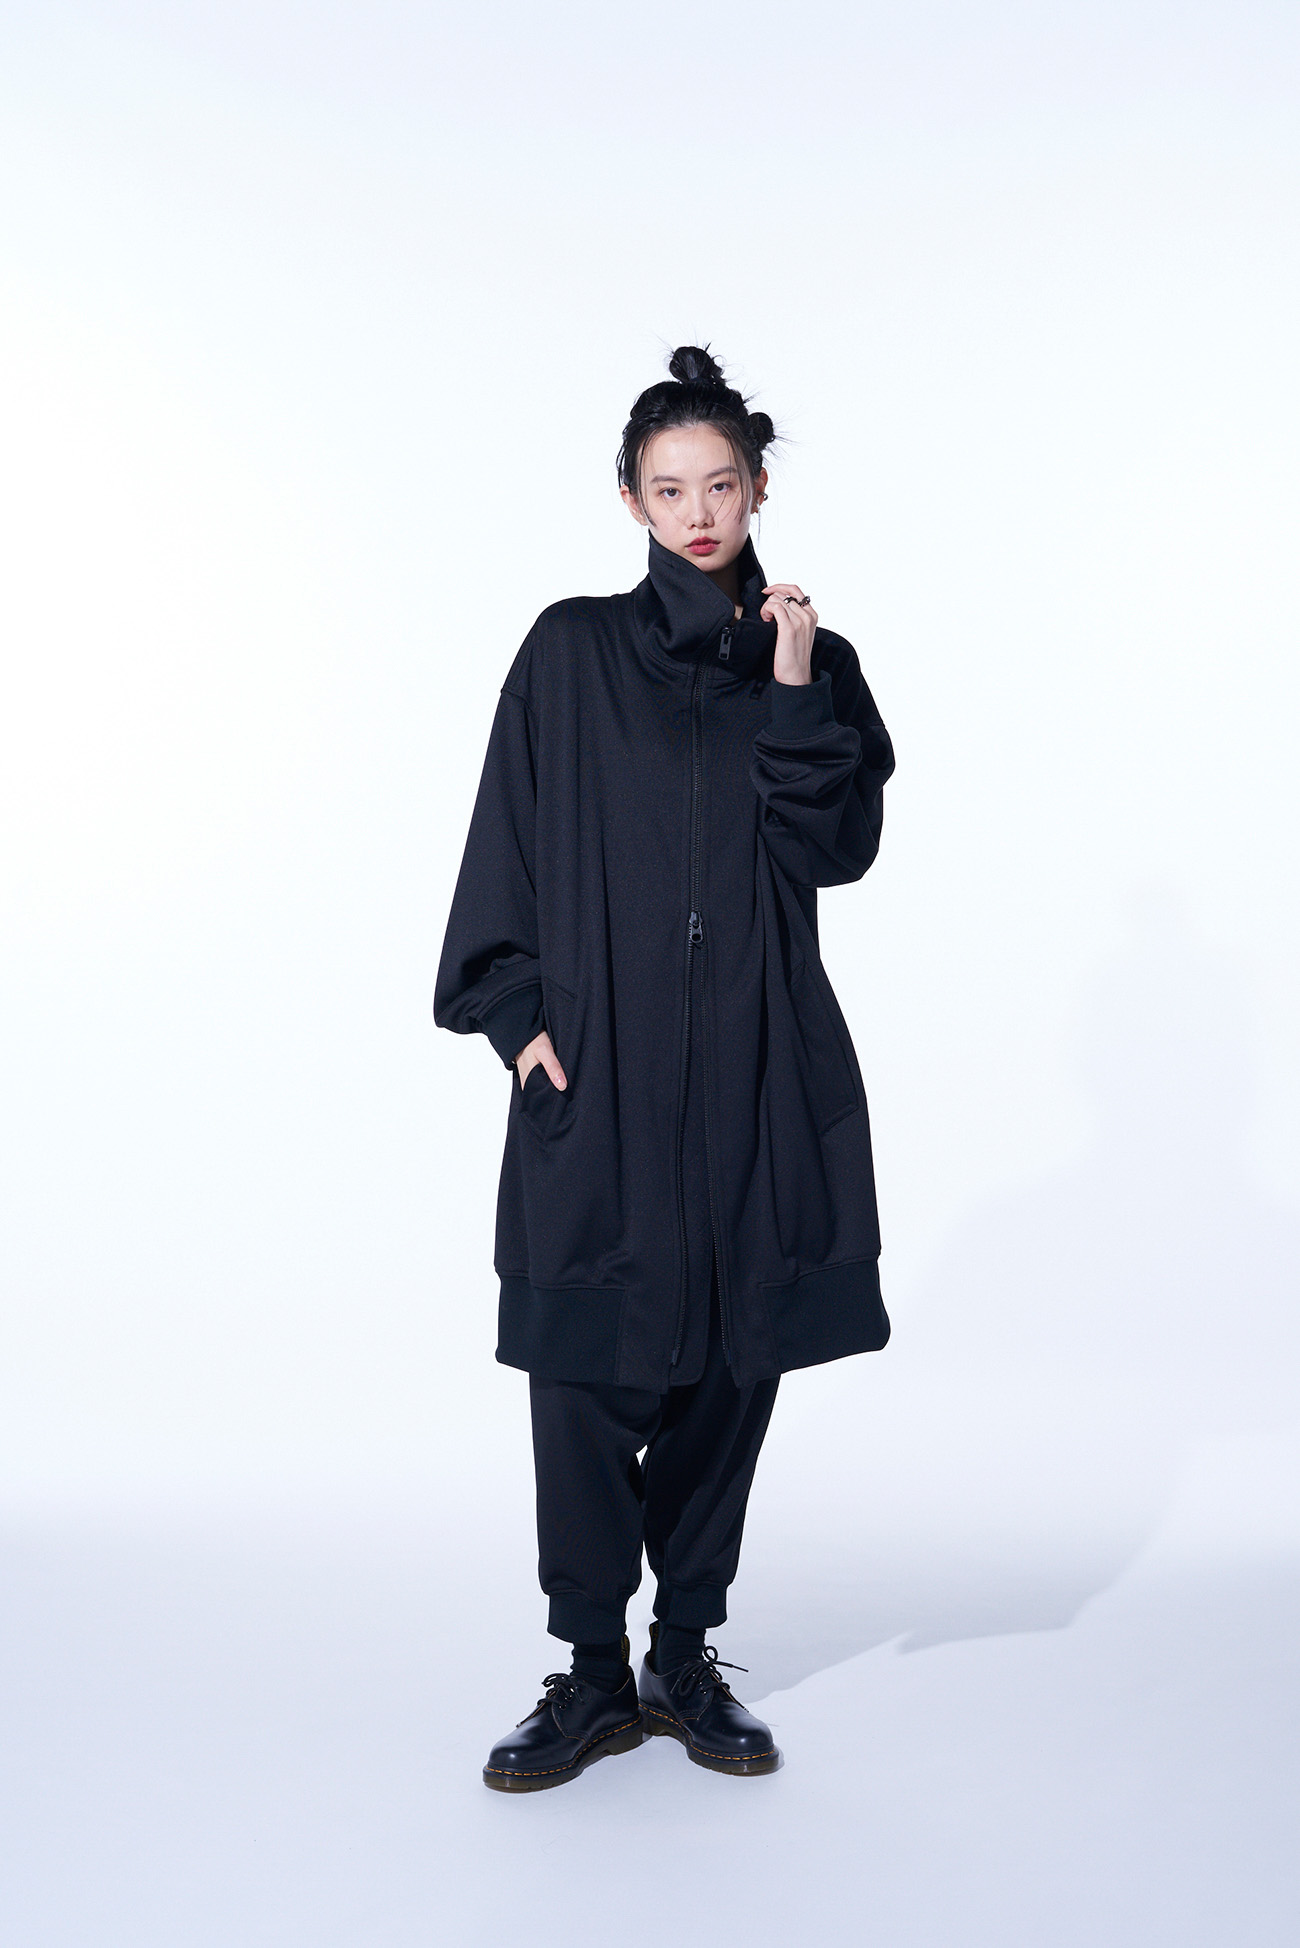 POLYESTER SMOOTH JERSEY OVERSIZED LONG TRUCK TOP